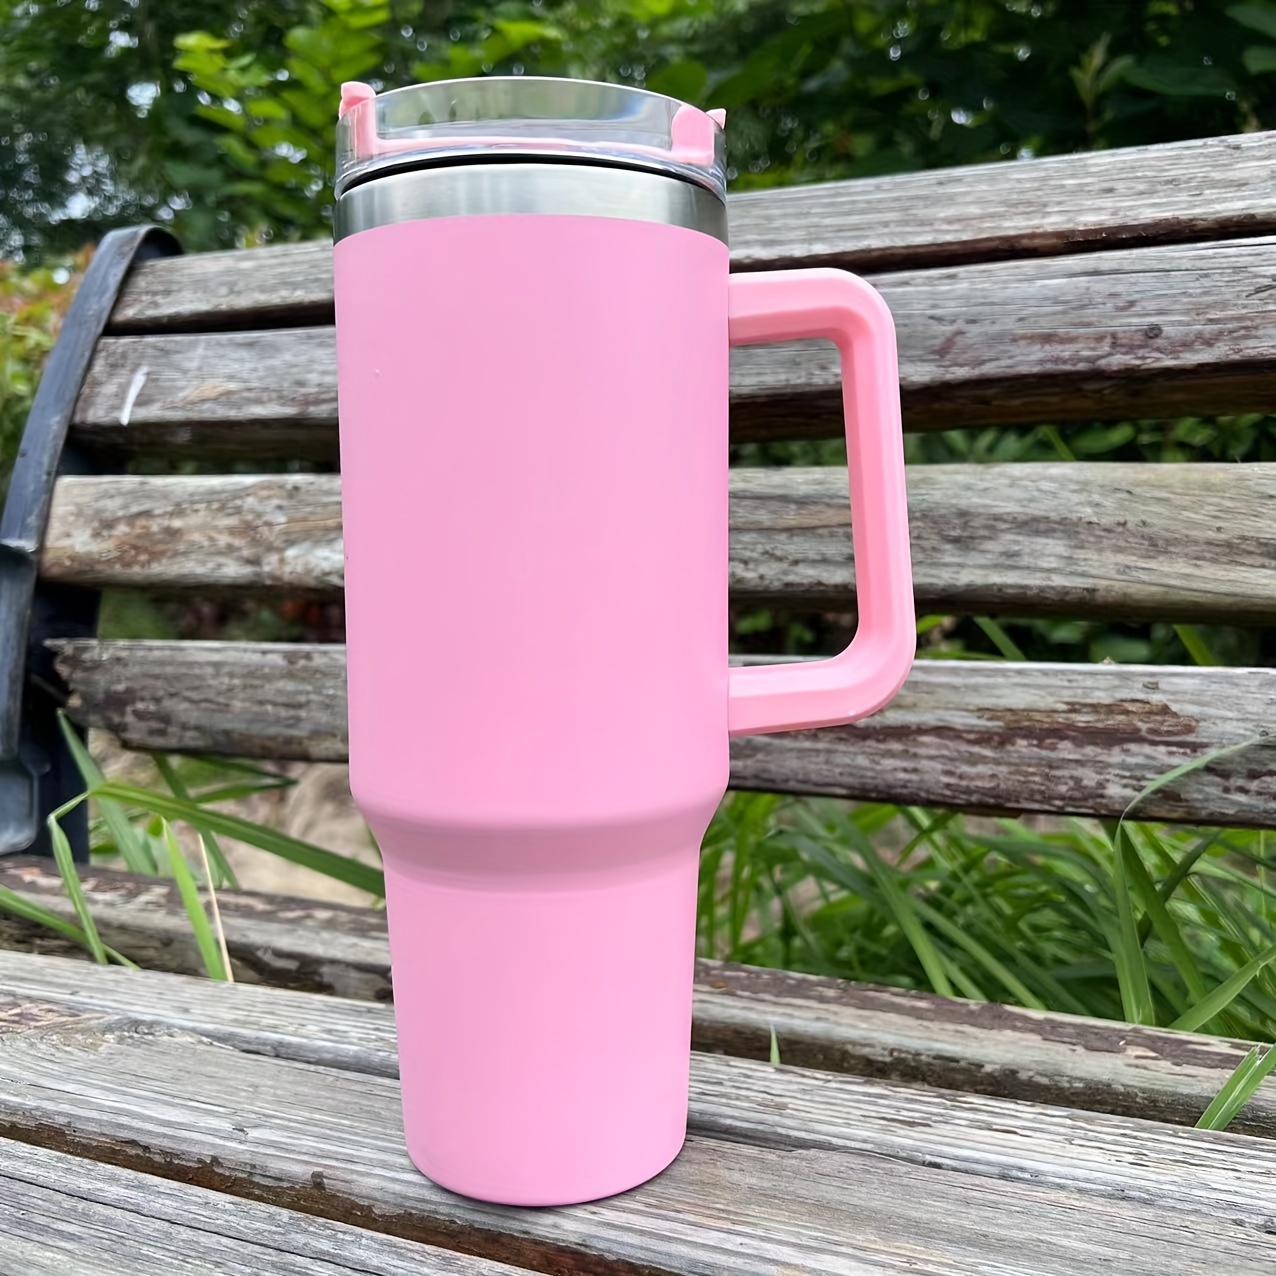 Vacuum Insulated Coffee Mug Stainless Steel Travel Tumbler - Thermal Cup 40oz Pink